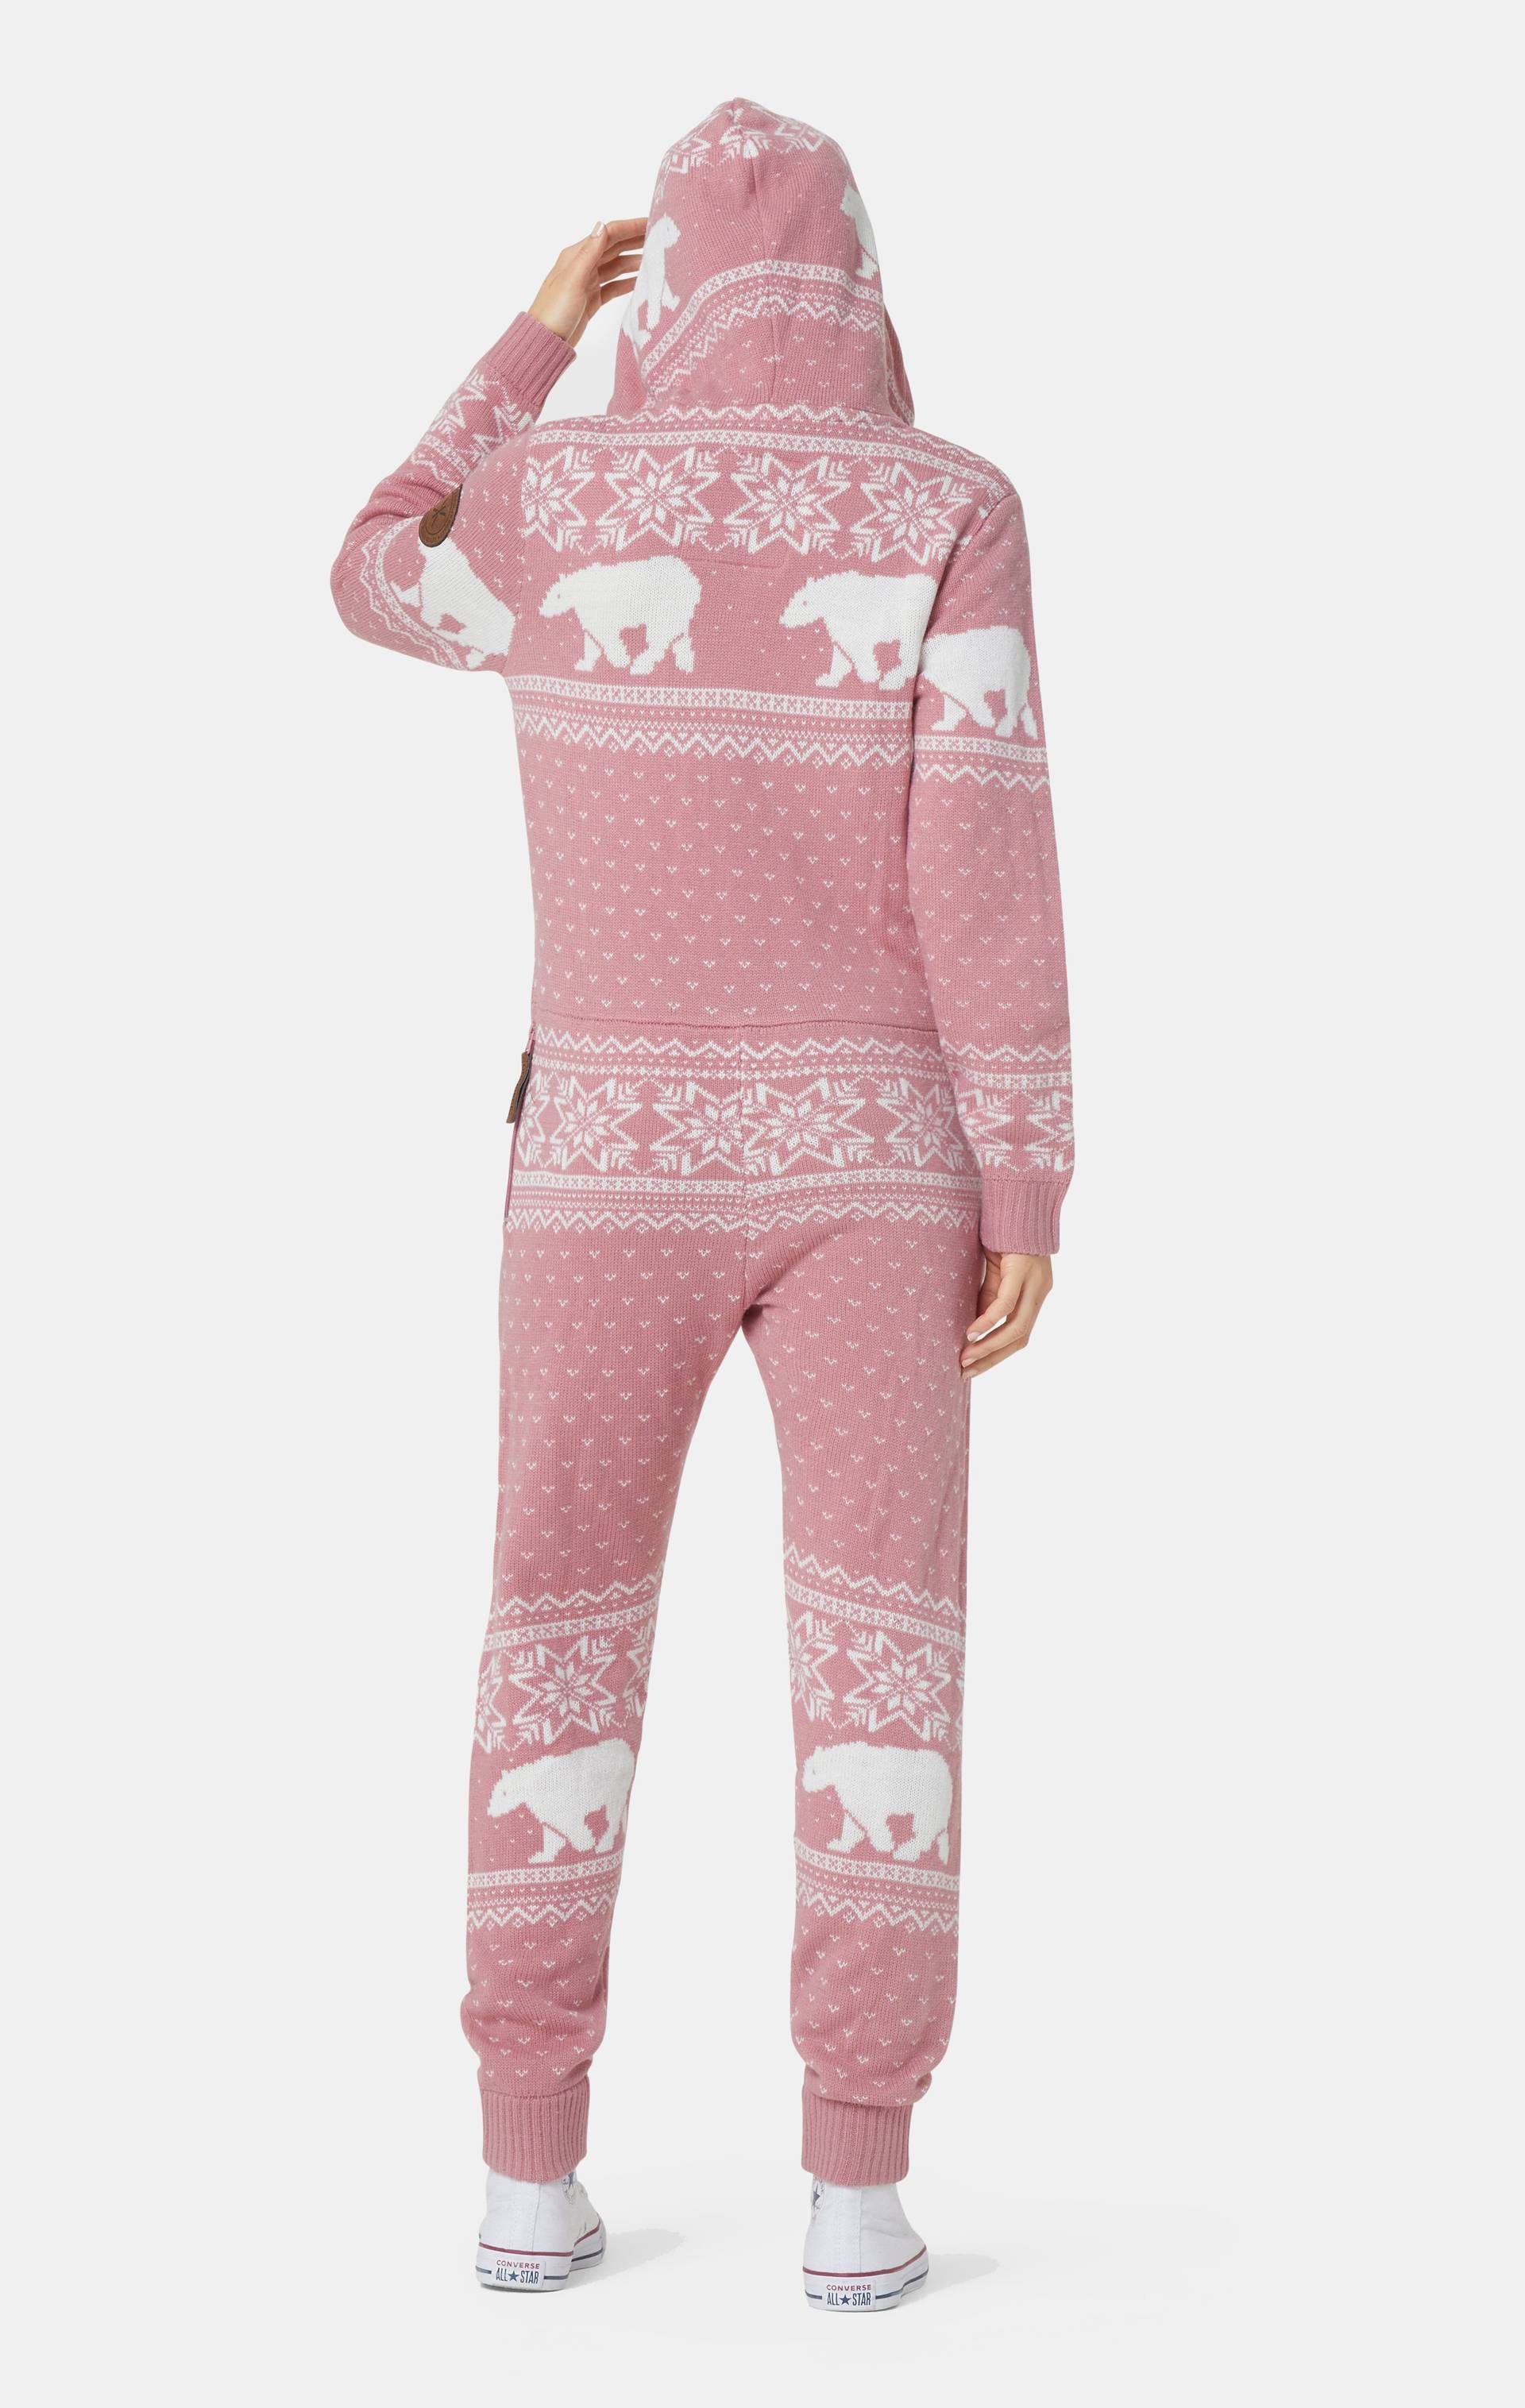 Onepiece Polar Bears Are Coming Jumpsuit Light Pink - 12